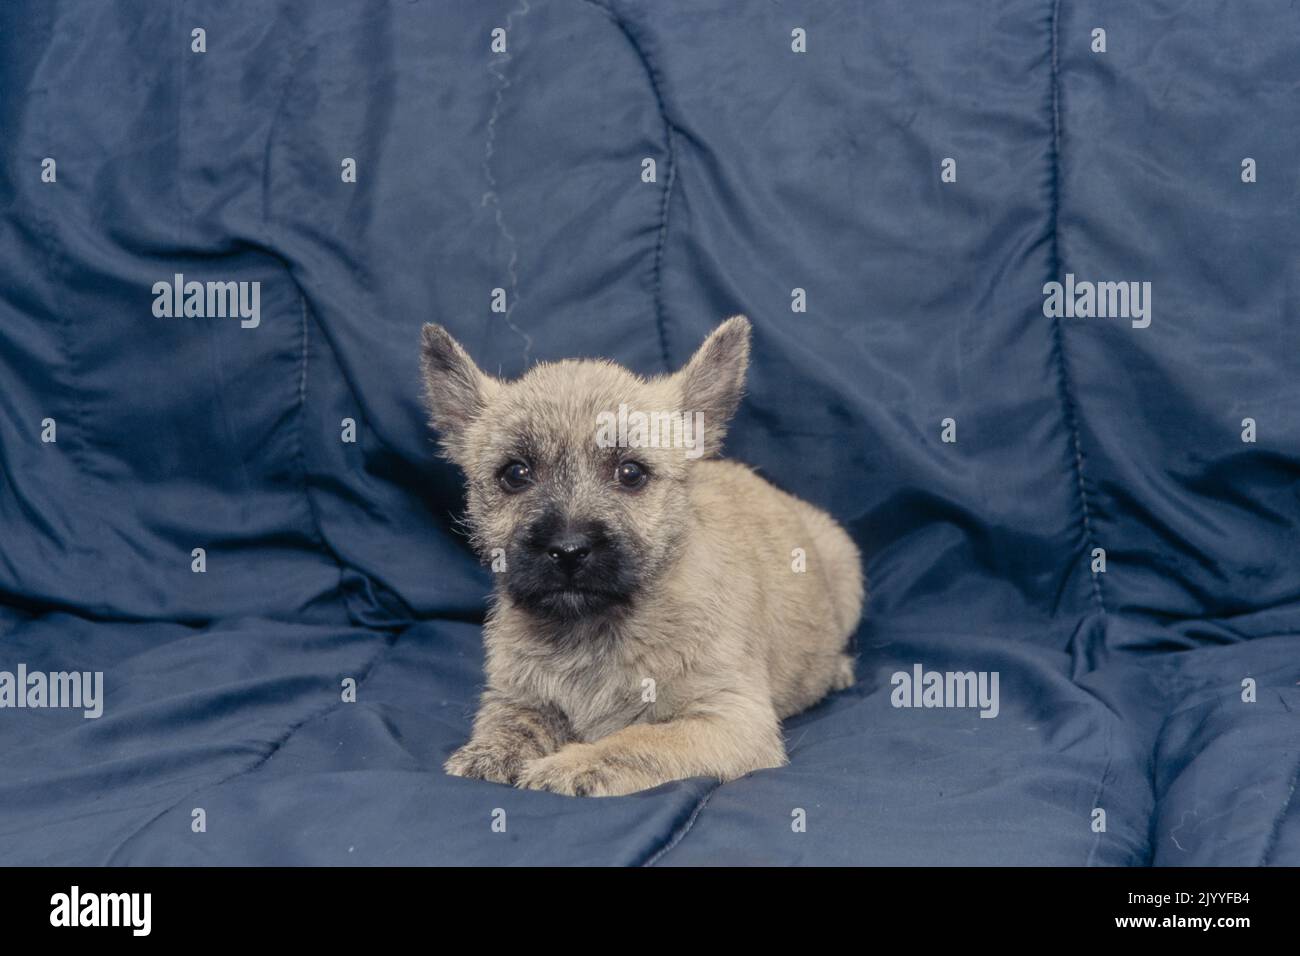 Cairn Terrier puppy on couch Stock Photo